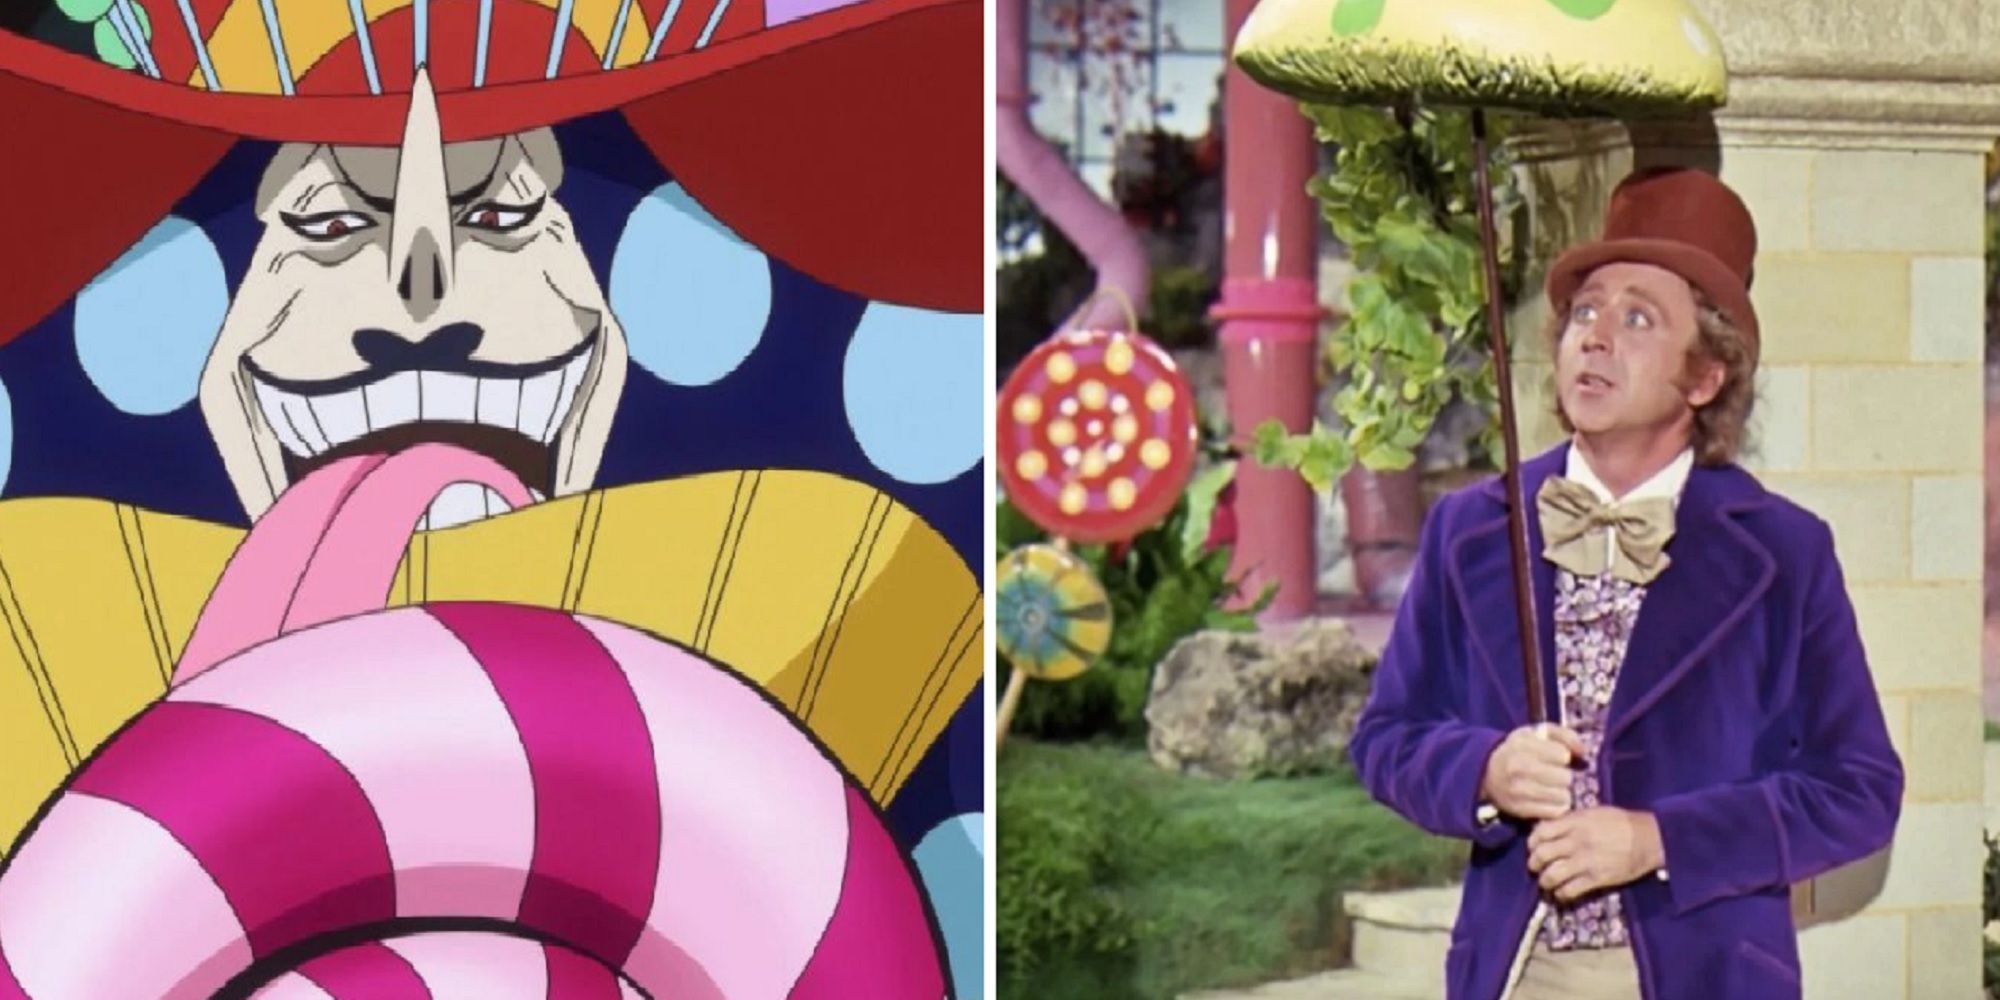 Split image of One Piece's Charlotte Perospero licking a lollipop and Roald Dahl's Willy Wonka holding a cane